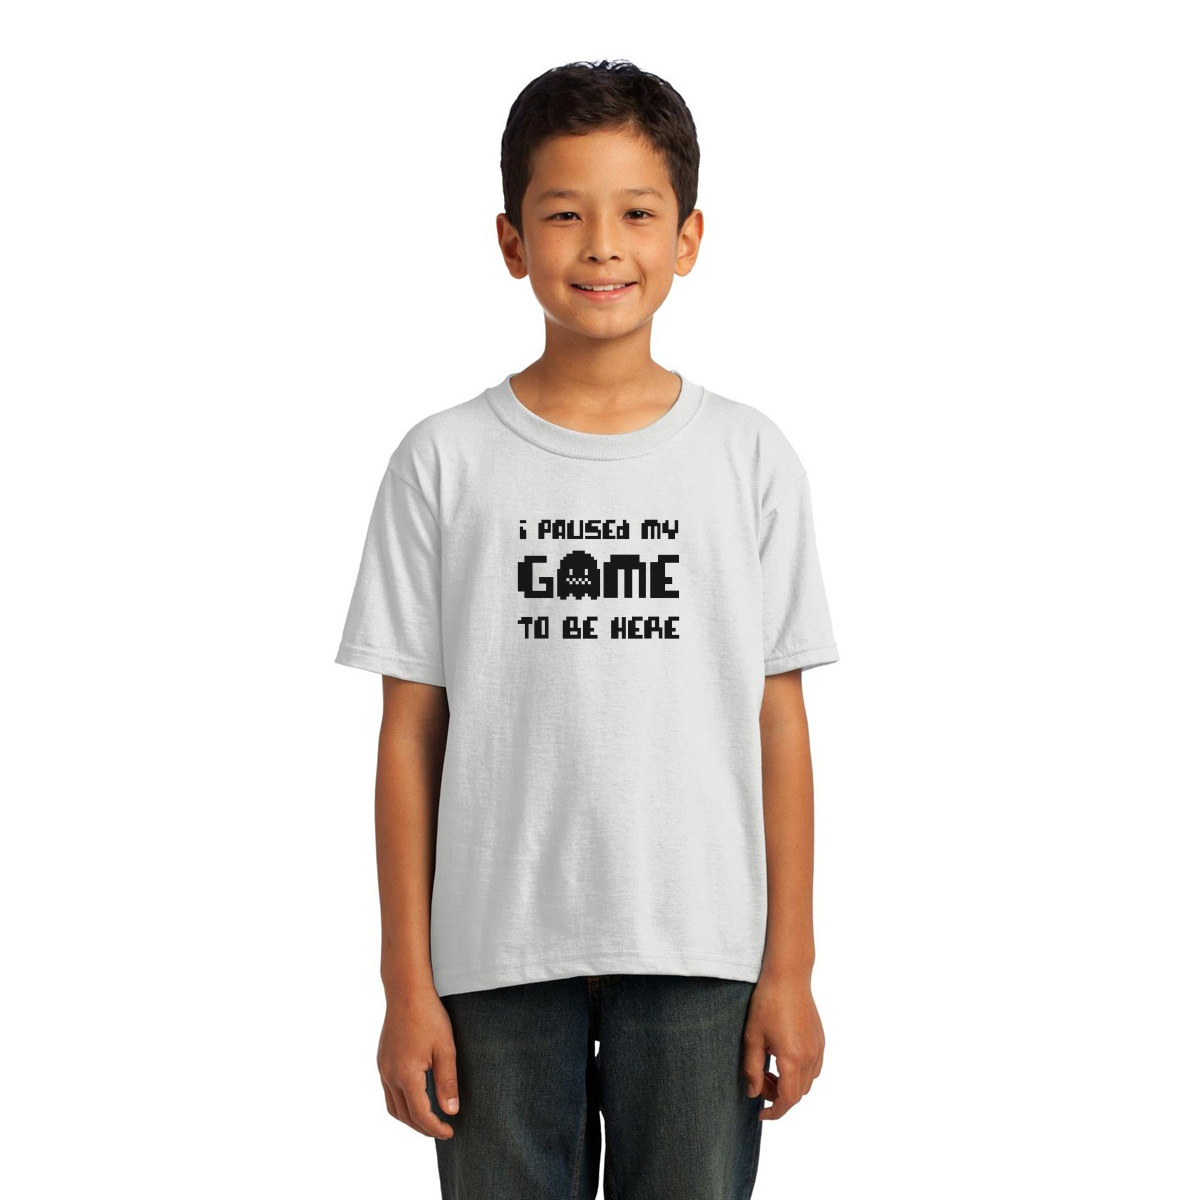 I Paused My Game To Be Here  Kids T-shirt | White